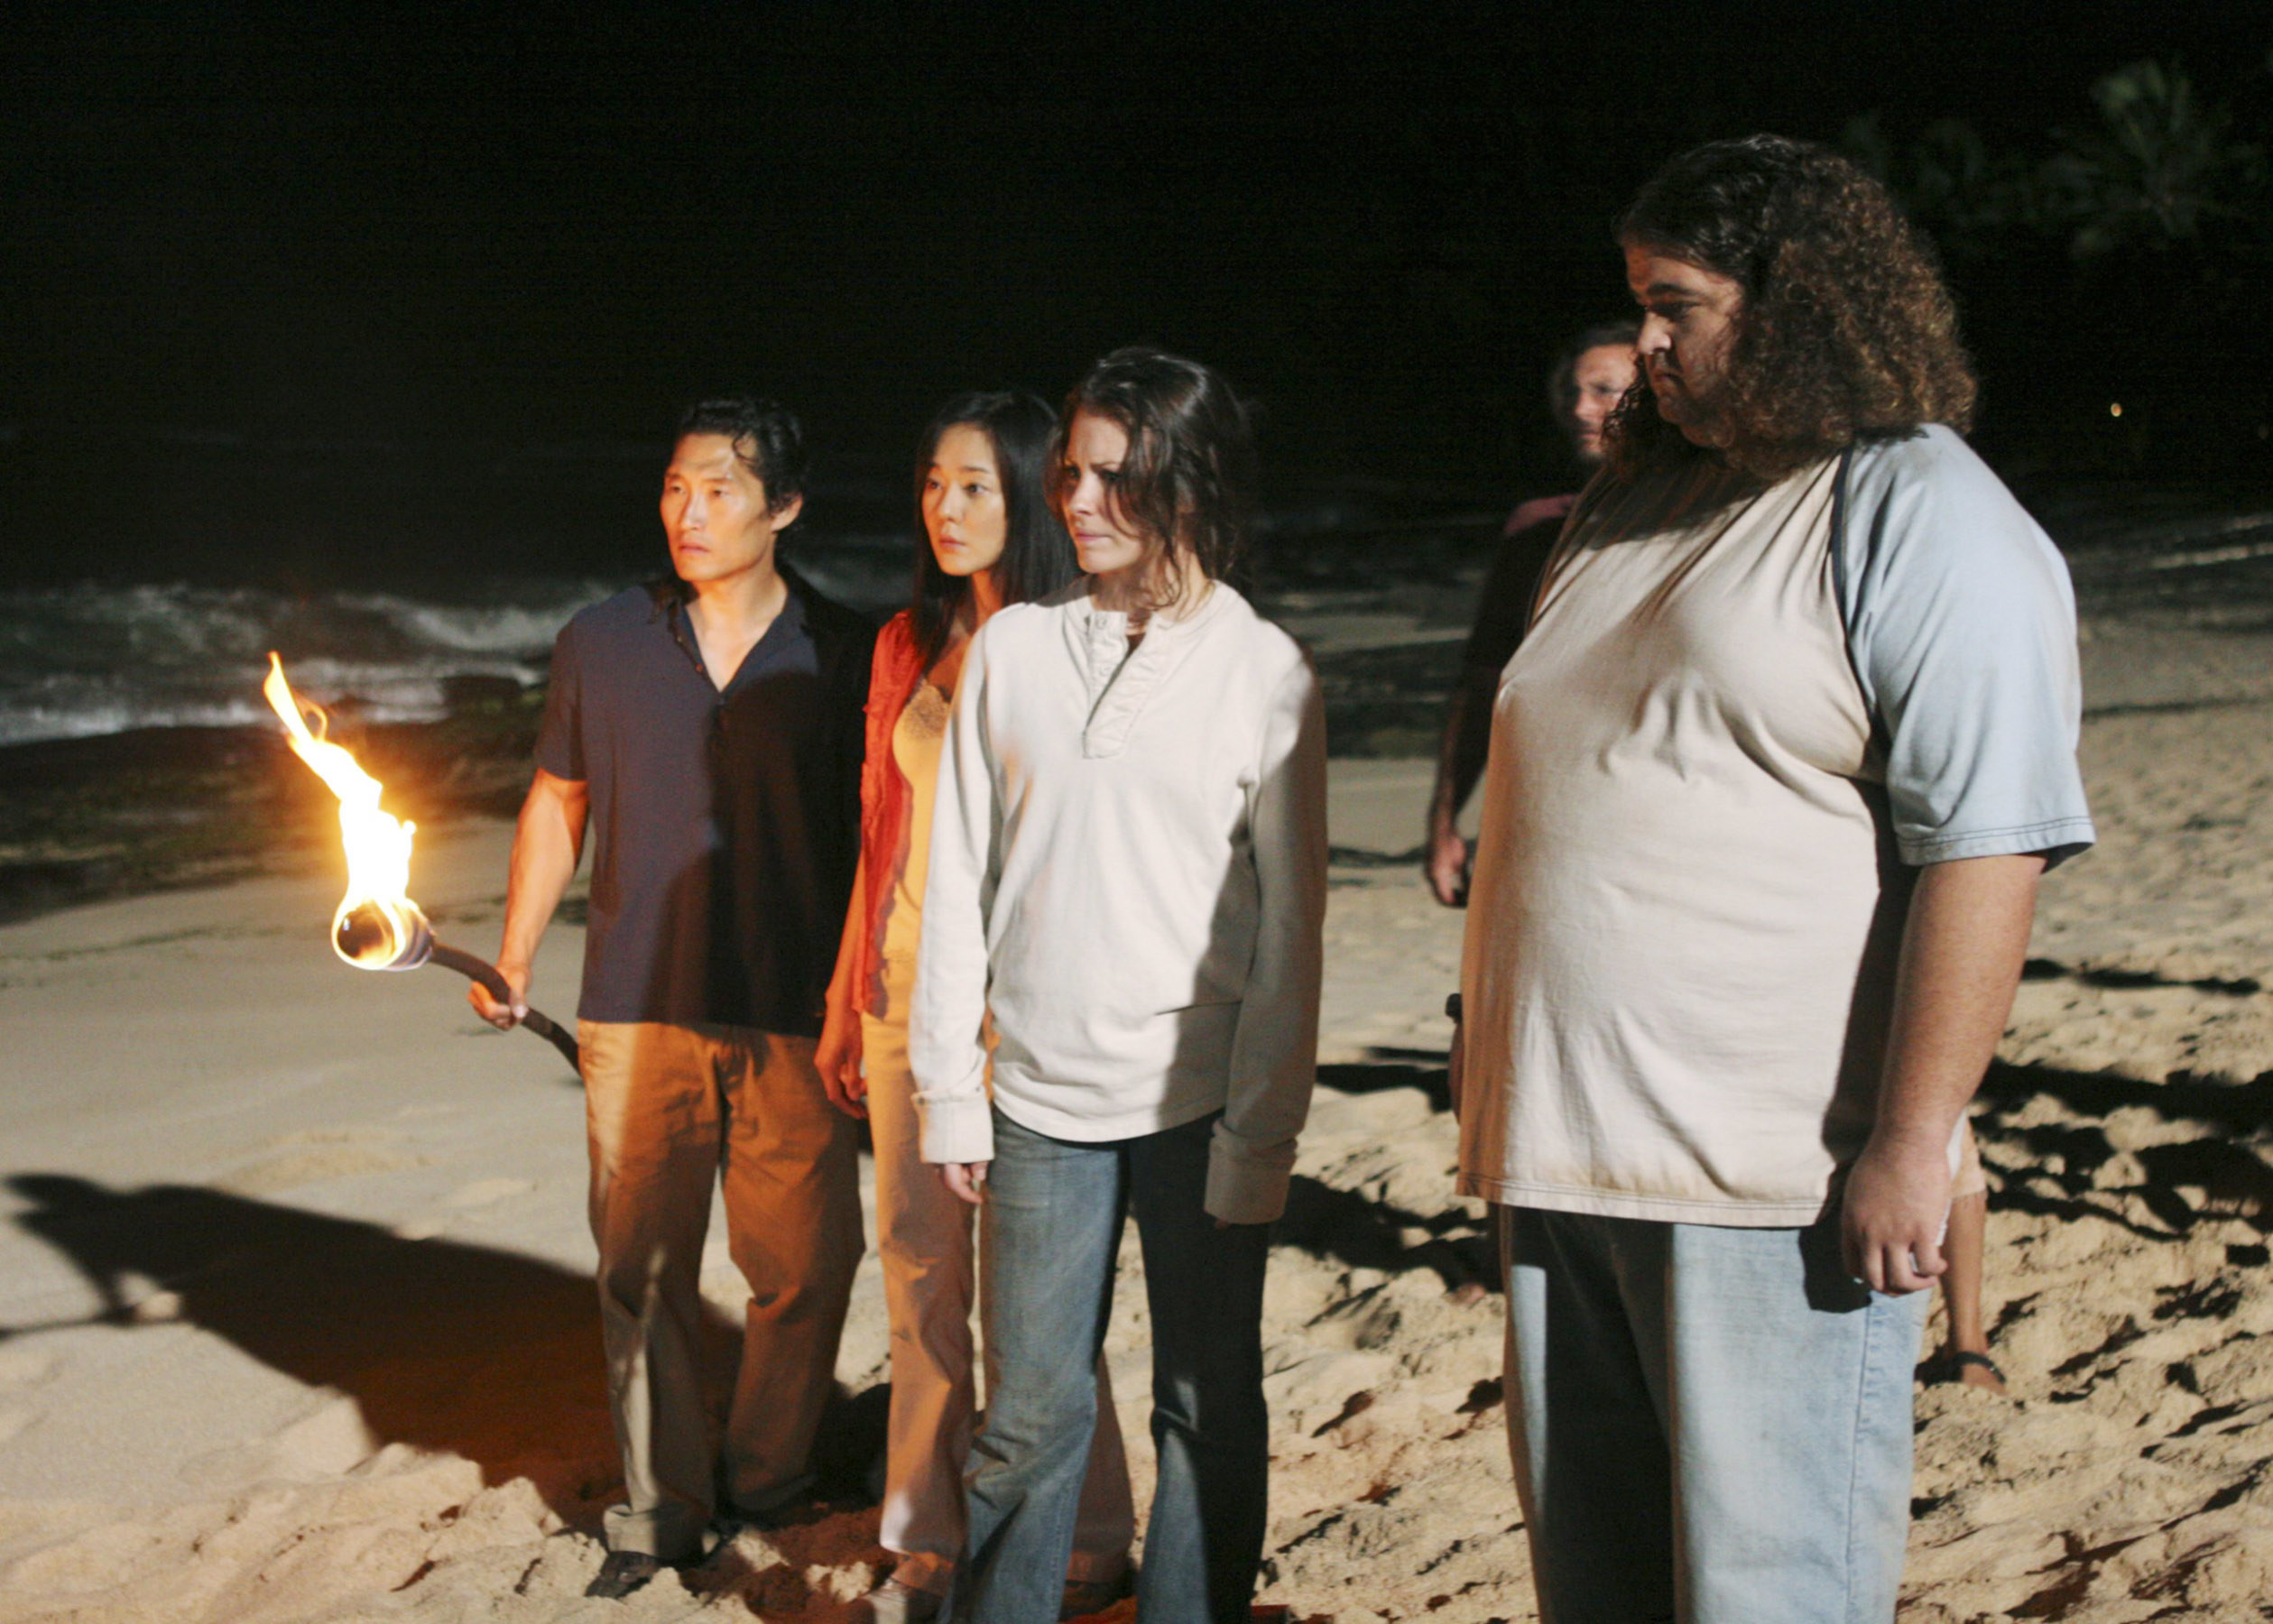 some of the cast on the beach, with Daniel Dae Kim holding a torch